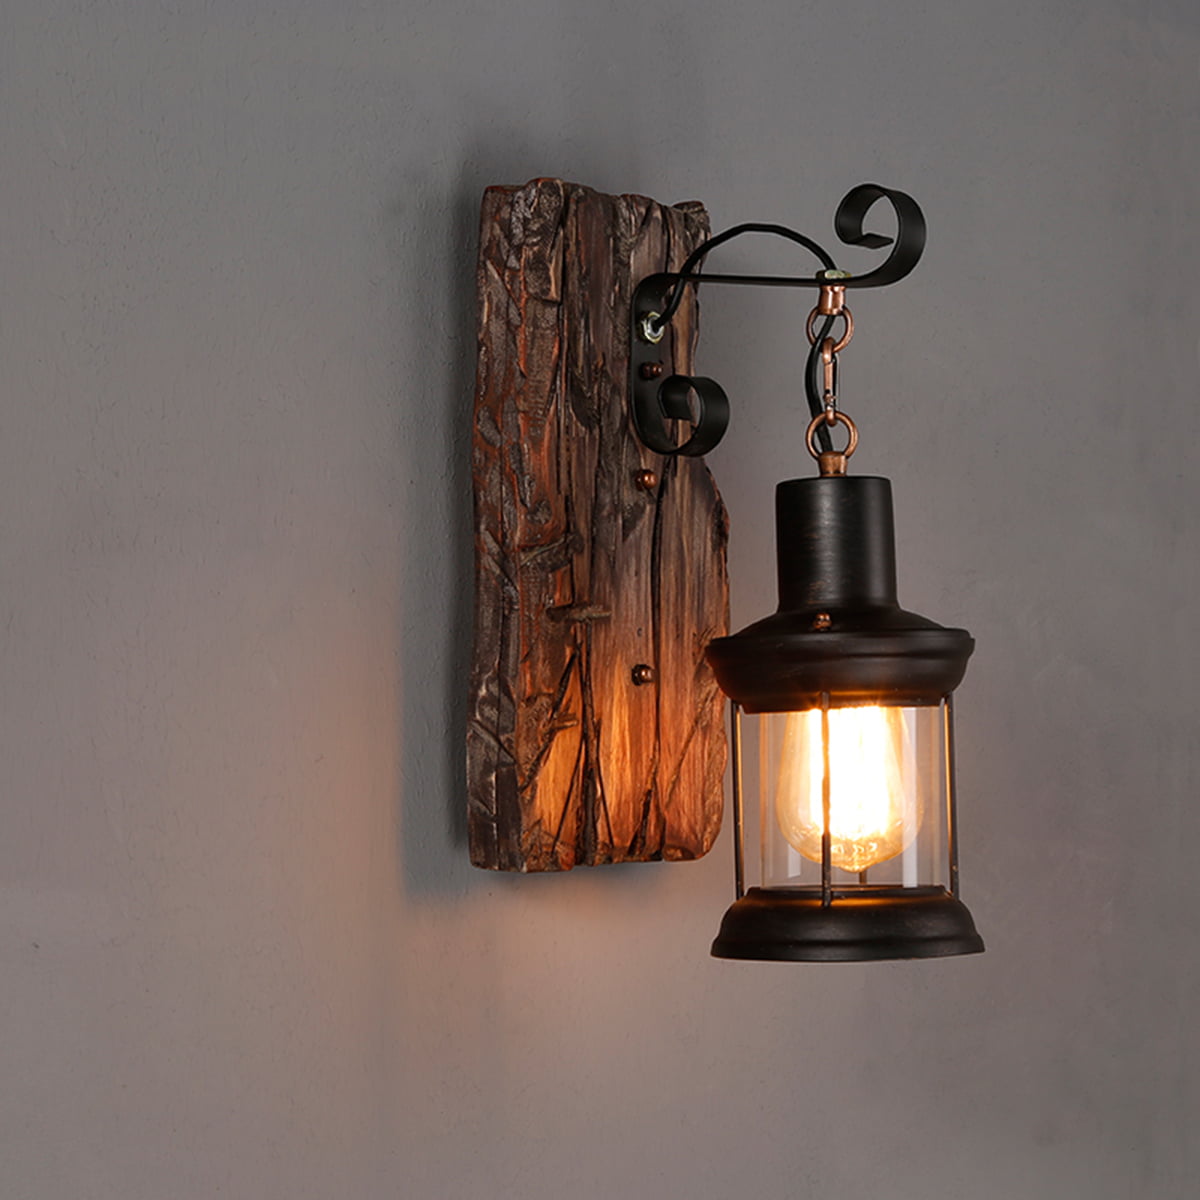 Details about   Industrial Wood Wall Retro Lamp Indoor Vintage Metal Sconce Hallway Light Lamp 